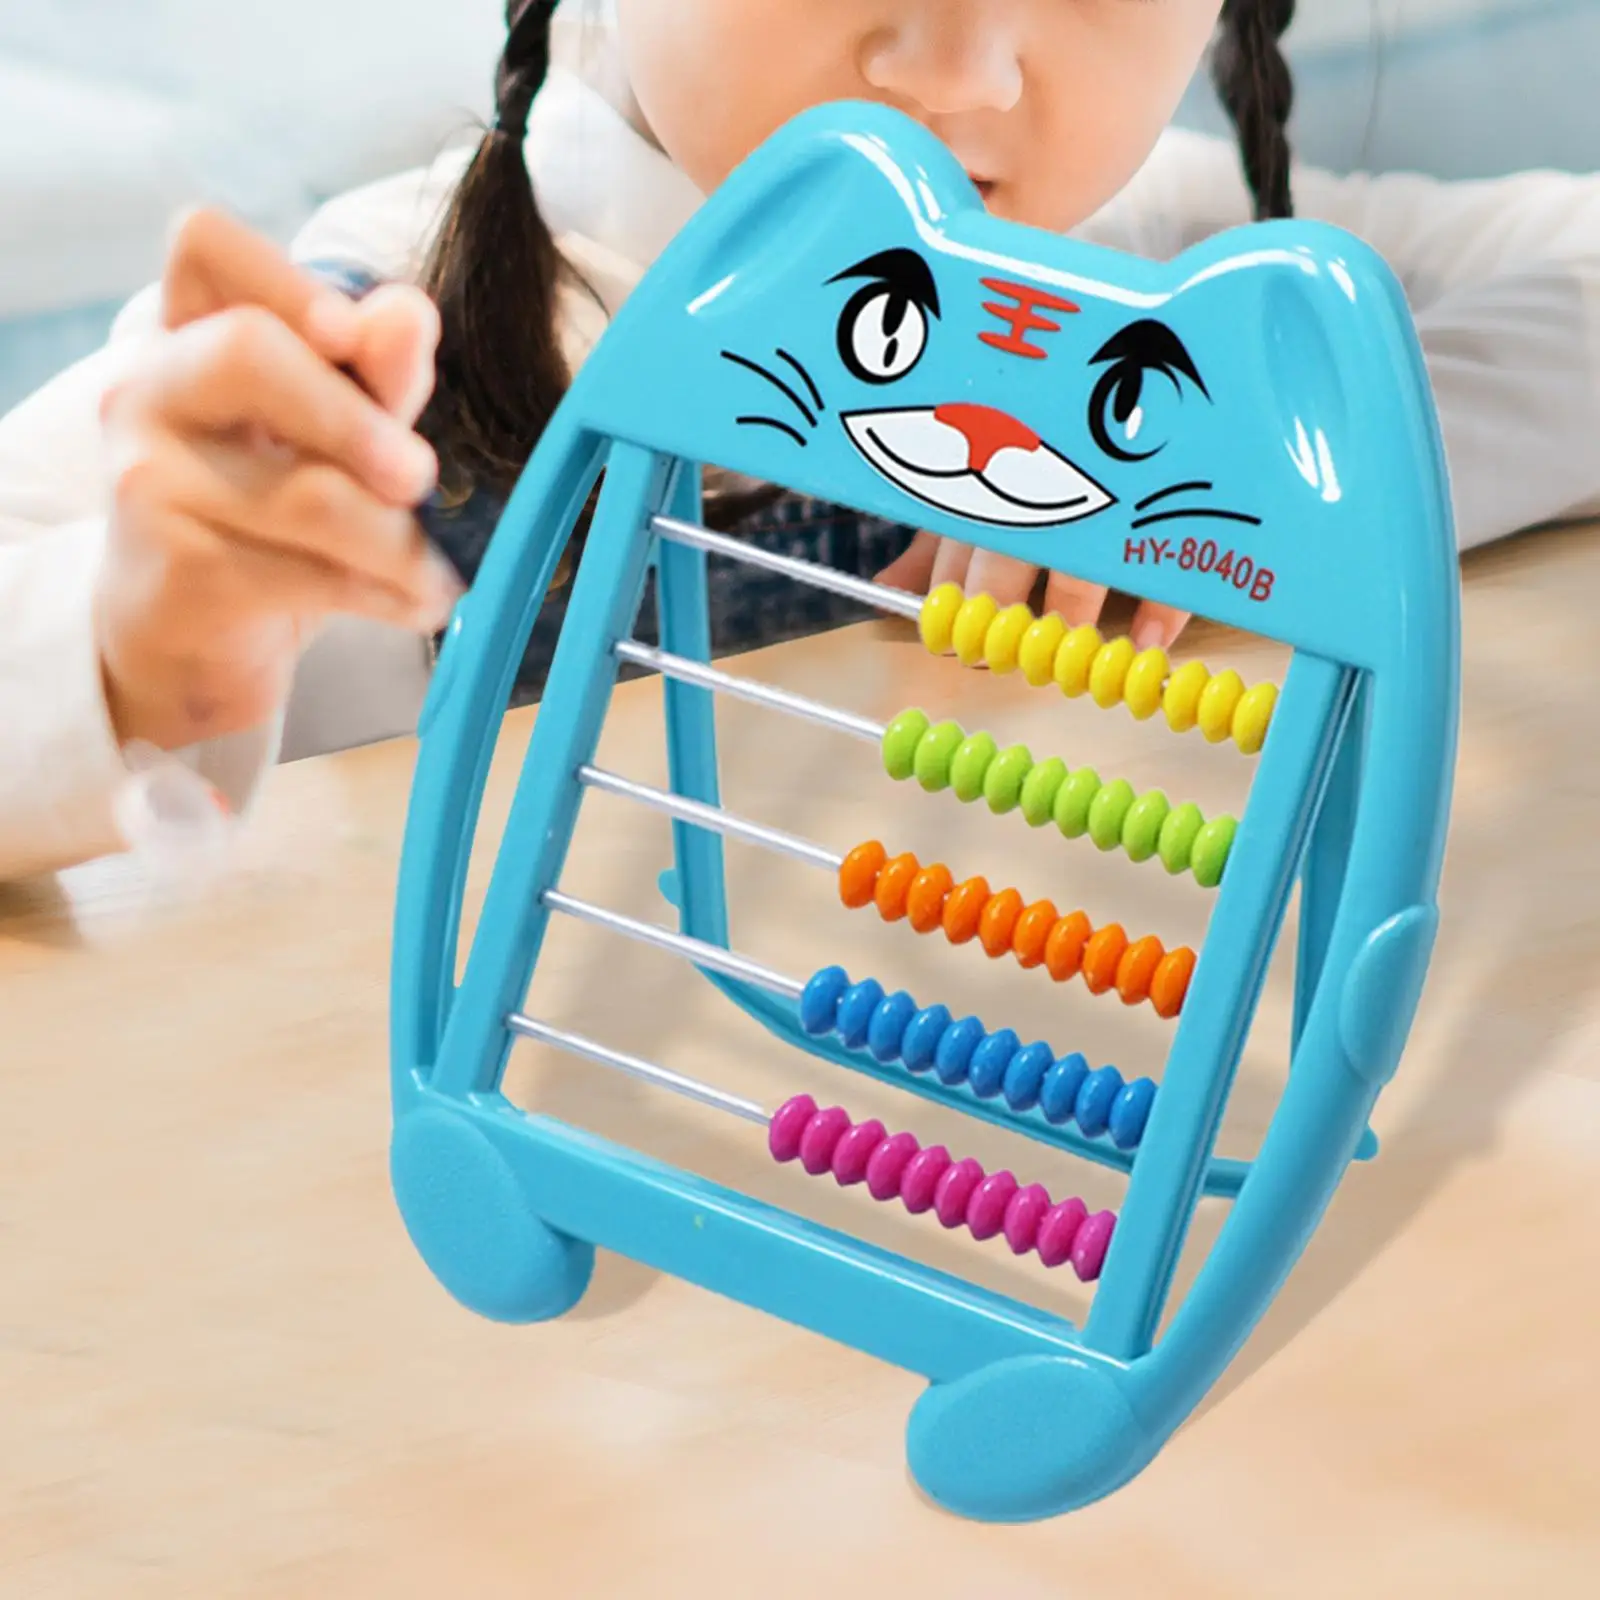 Abacus Educational Counting Frames Toy Math Learning Toy Counting Rack 5 Row Frame Abacus for Children Boy Toddlers Girls Gifts